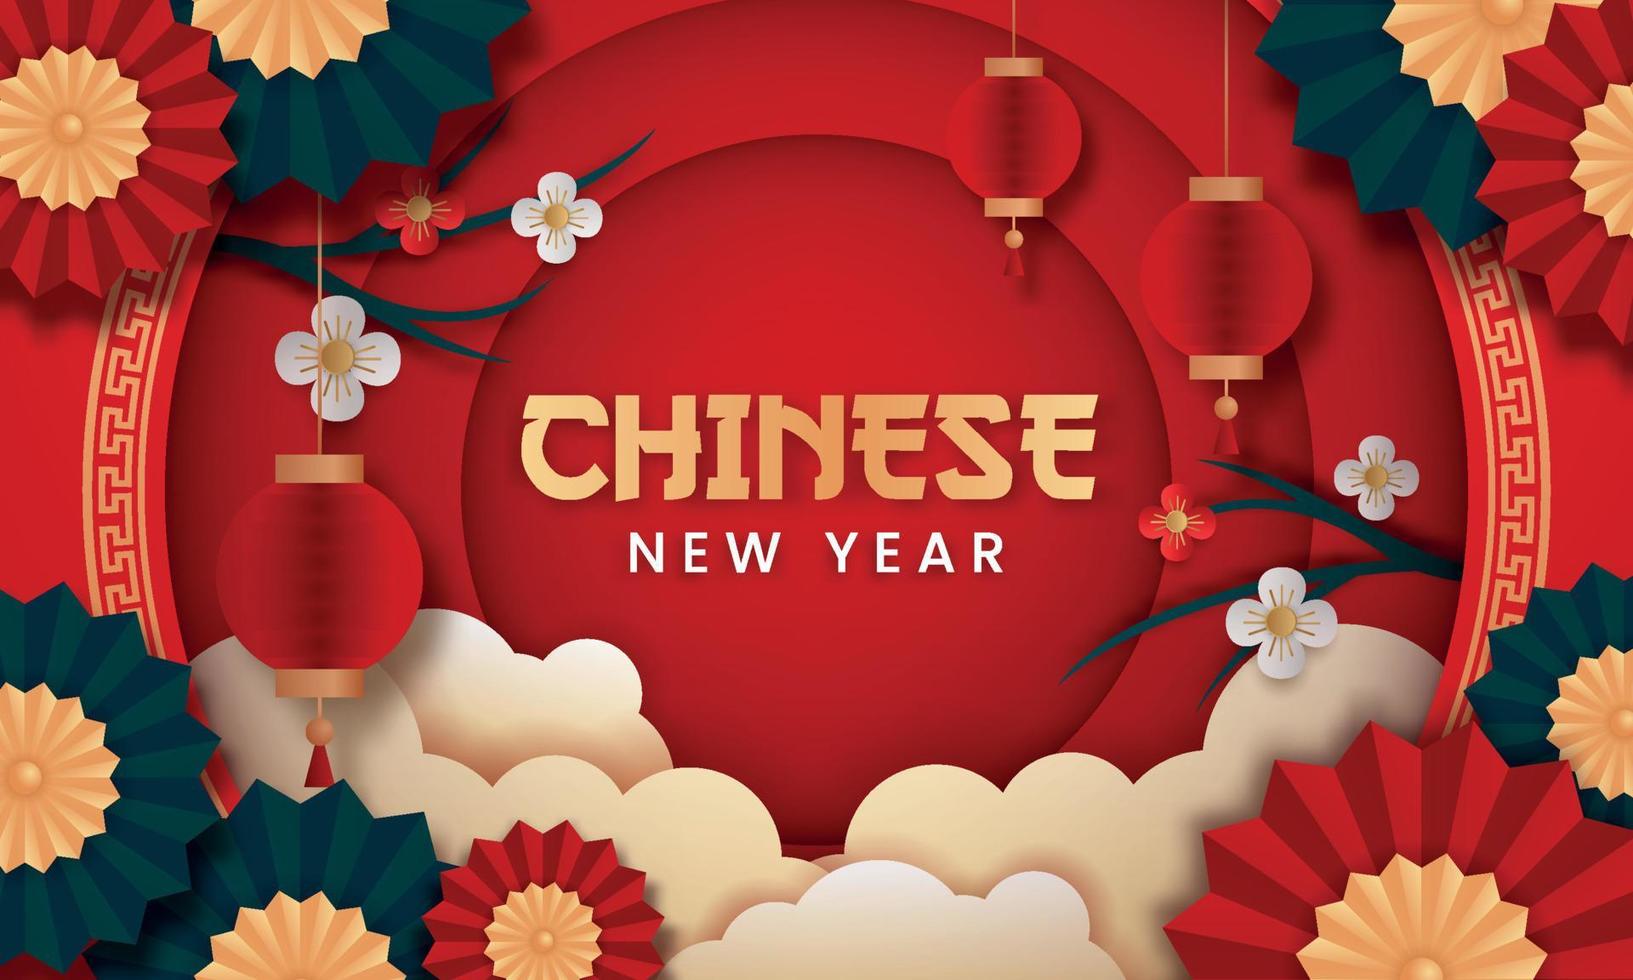 Chinese new year paper style vector. Poster or banner using lanterns, umbrellas and flowers suitable for chinese new year event. vector